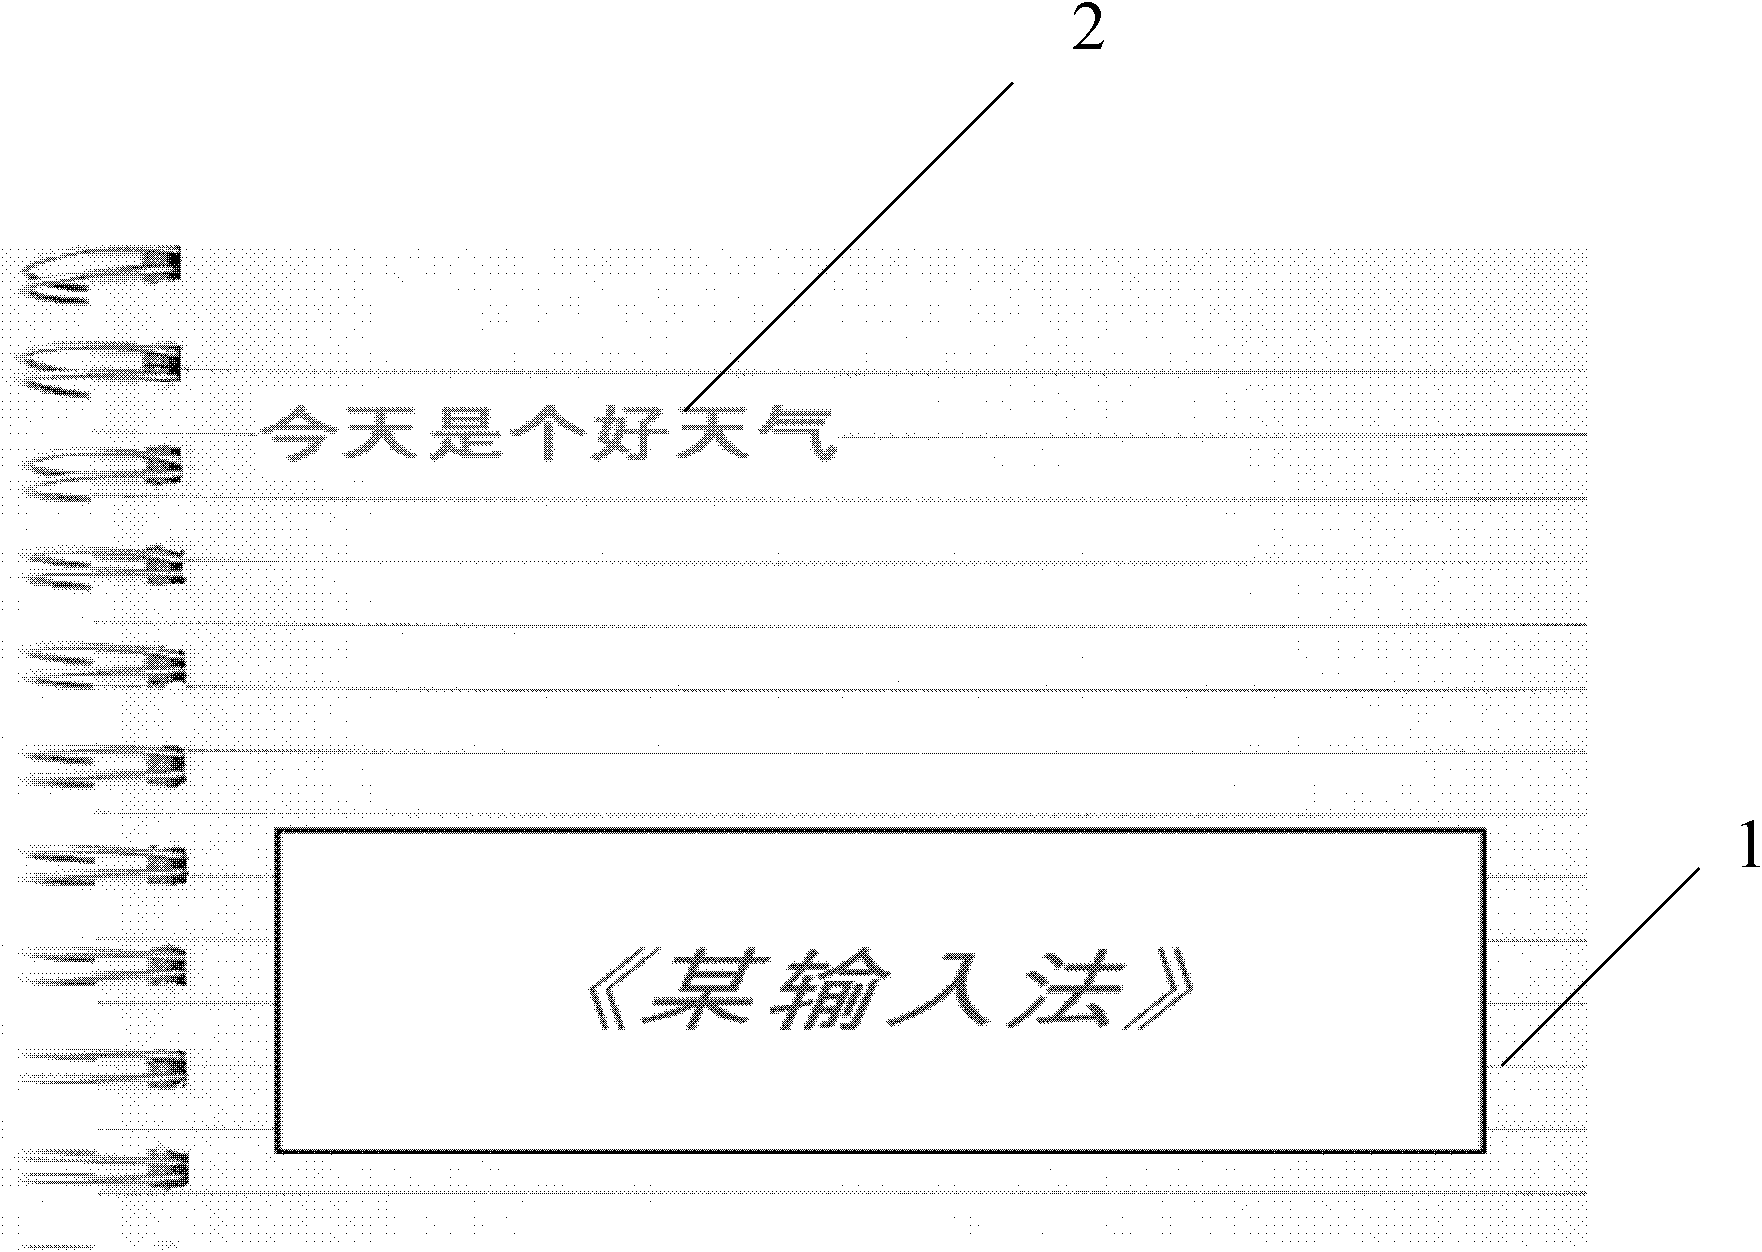 Handwriting processing method and system